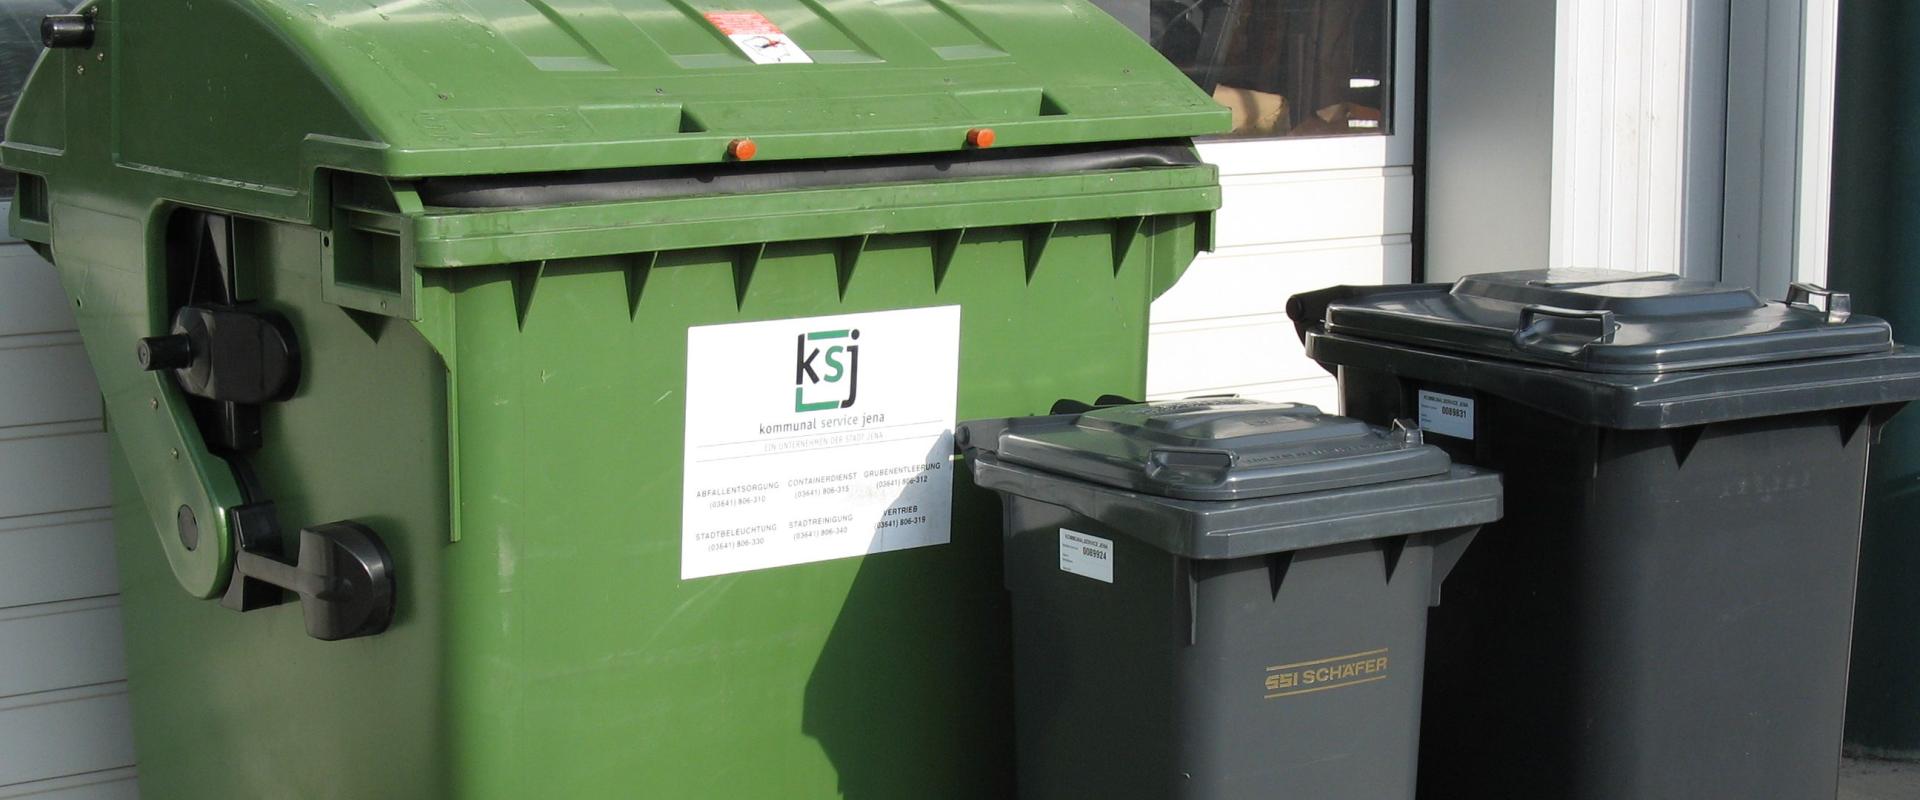 Residual waste containers